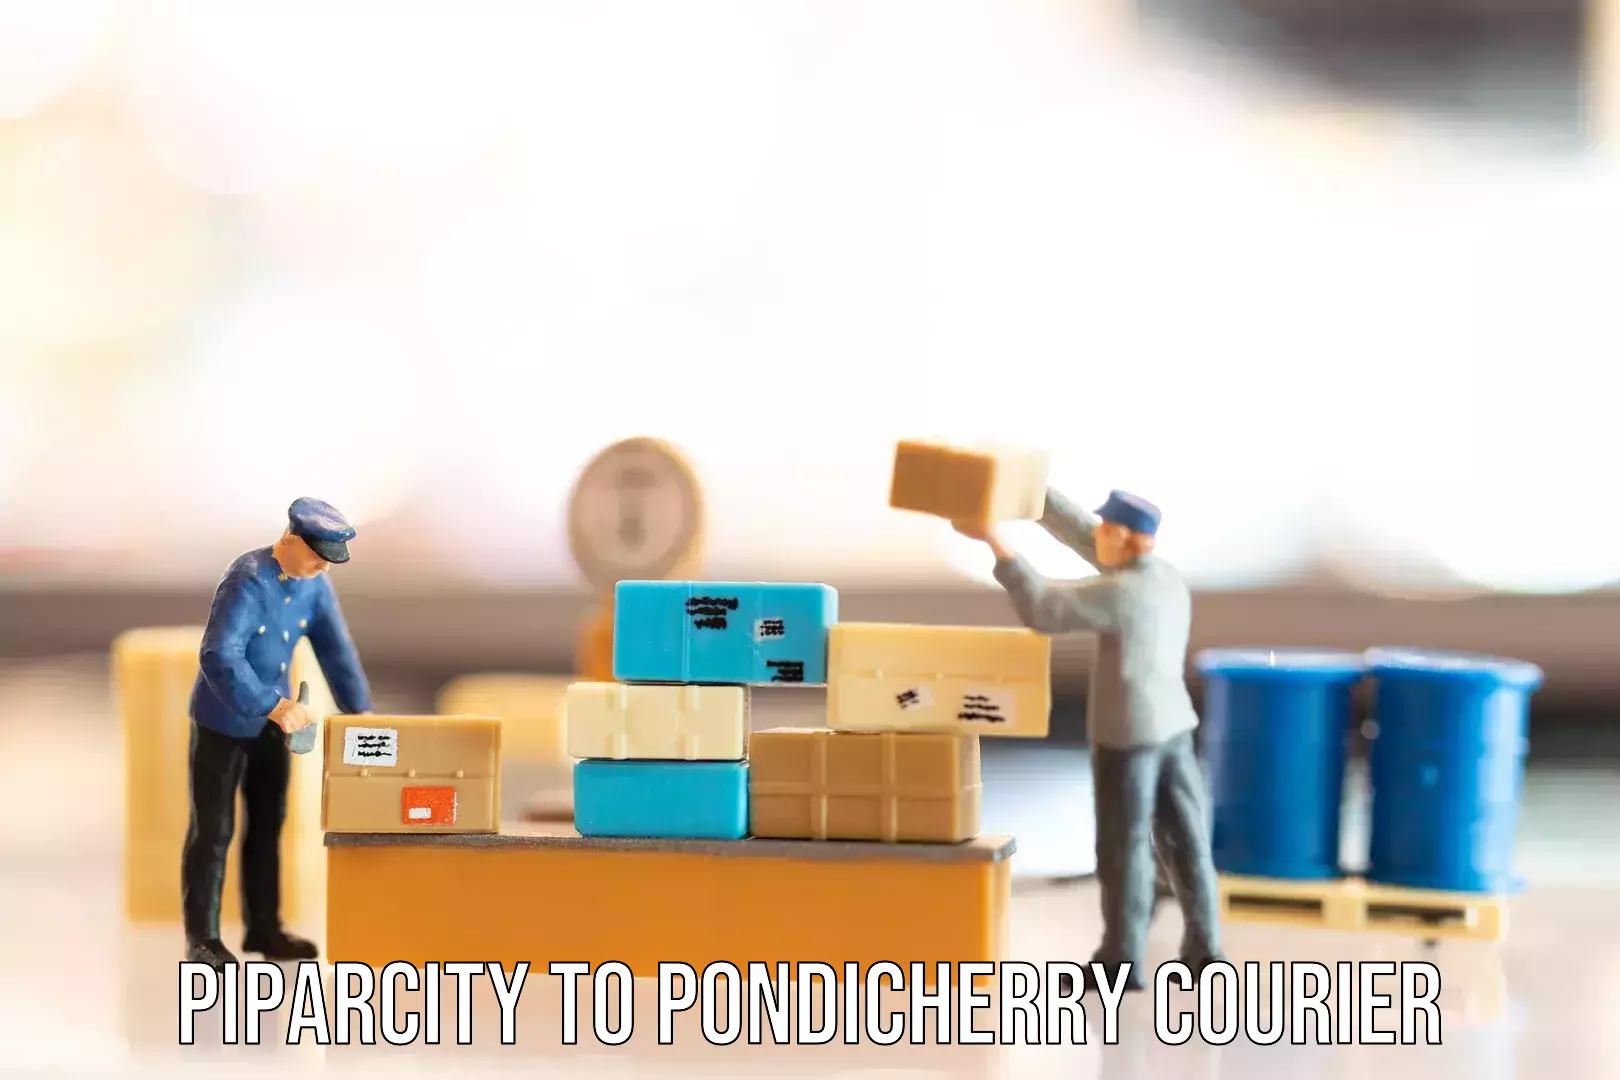 Luggage shipment strategy Piparcity to Pondicherry